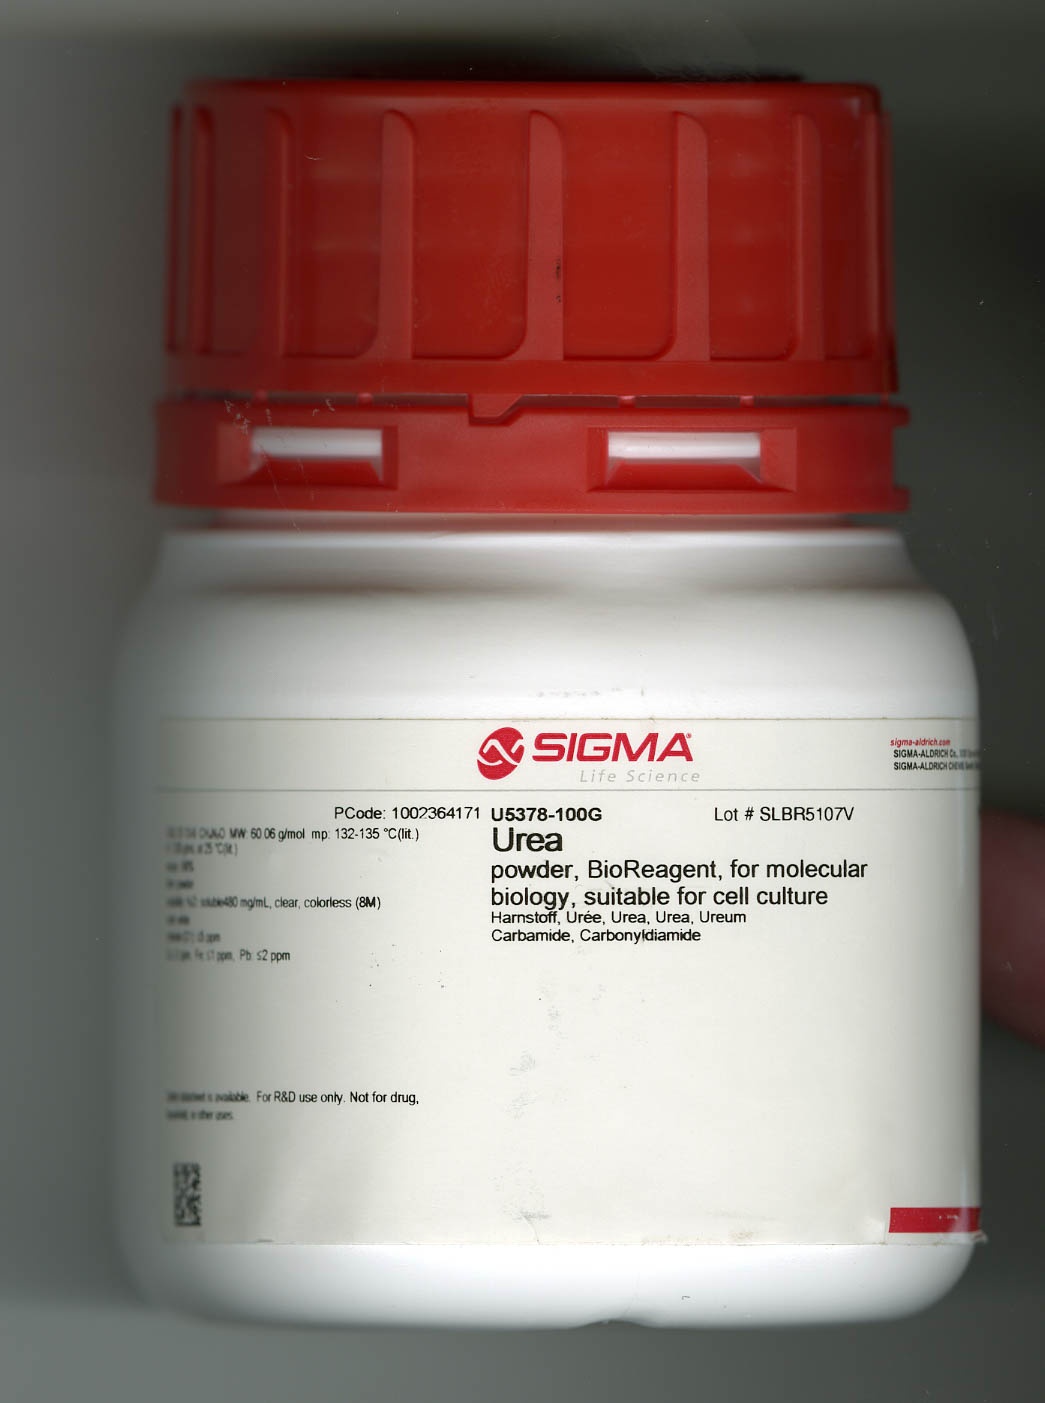 Urea chemical bottle for making cell cultures